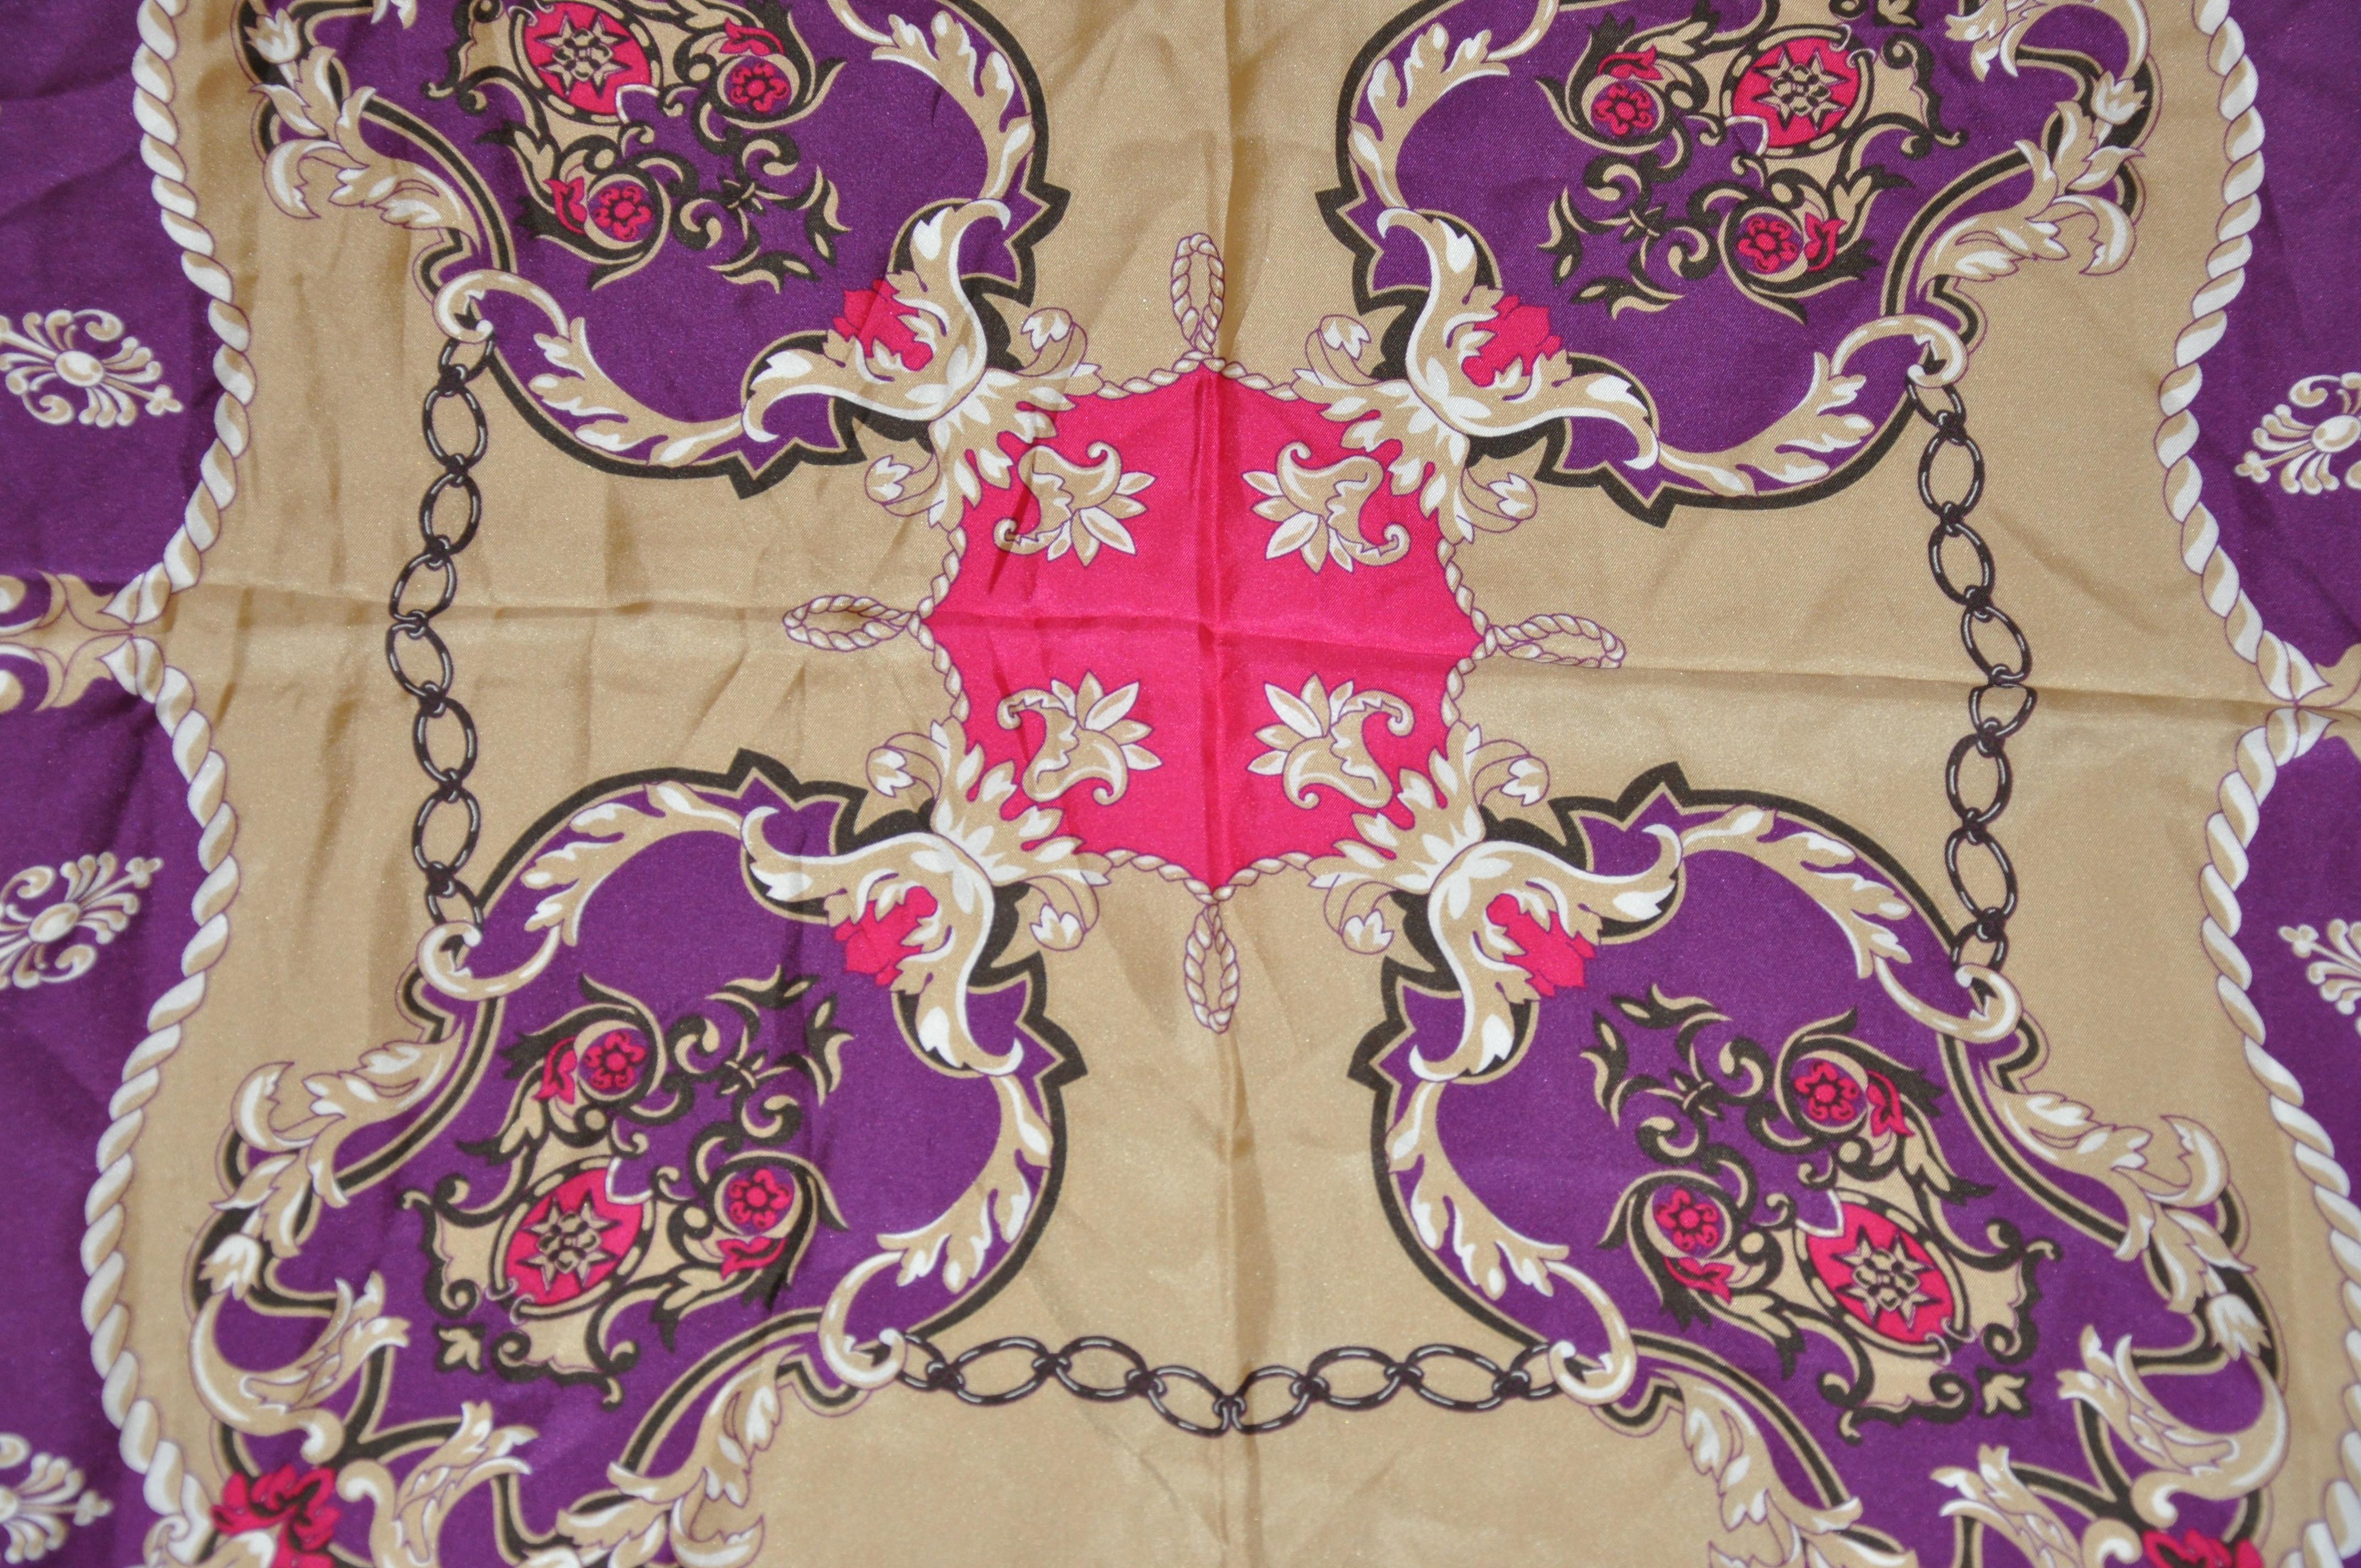        Fuchsia & Violet Majestic silk scarf finished with hand-rolled edges, measures 35 inches by 35 inches. Made in Italy.